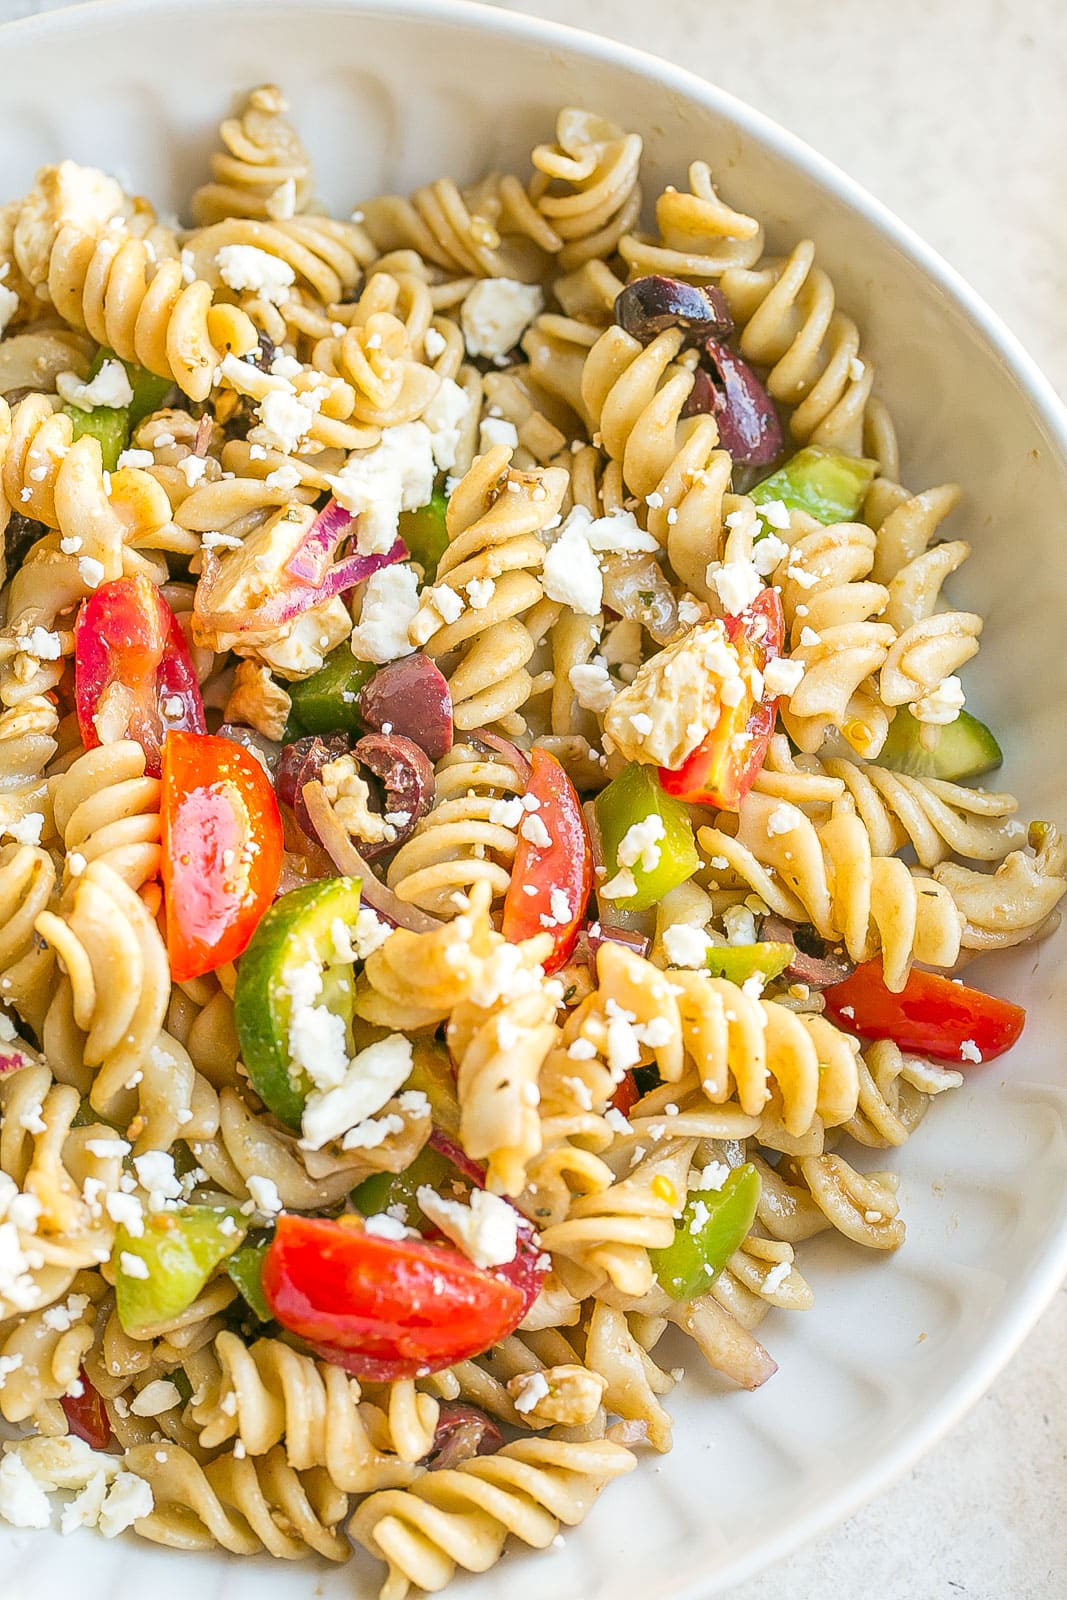 Greek salad with pasta in a bowl.